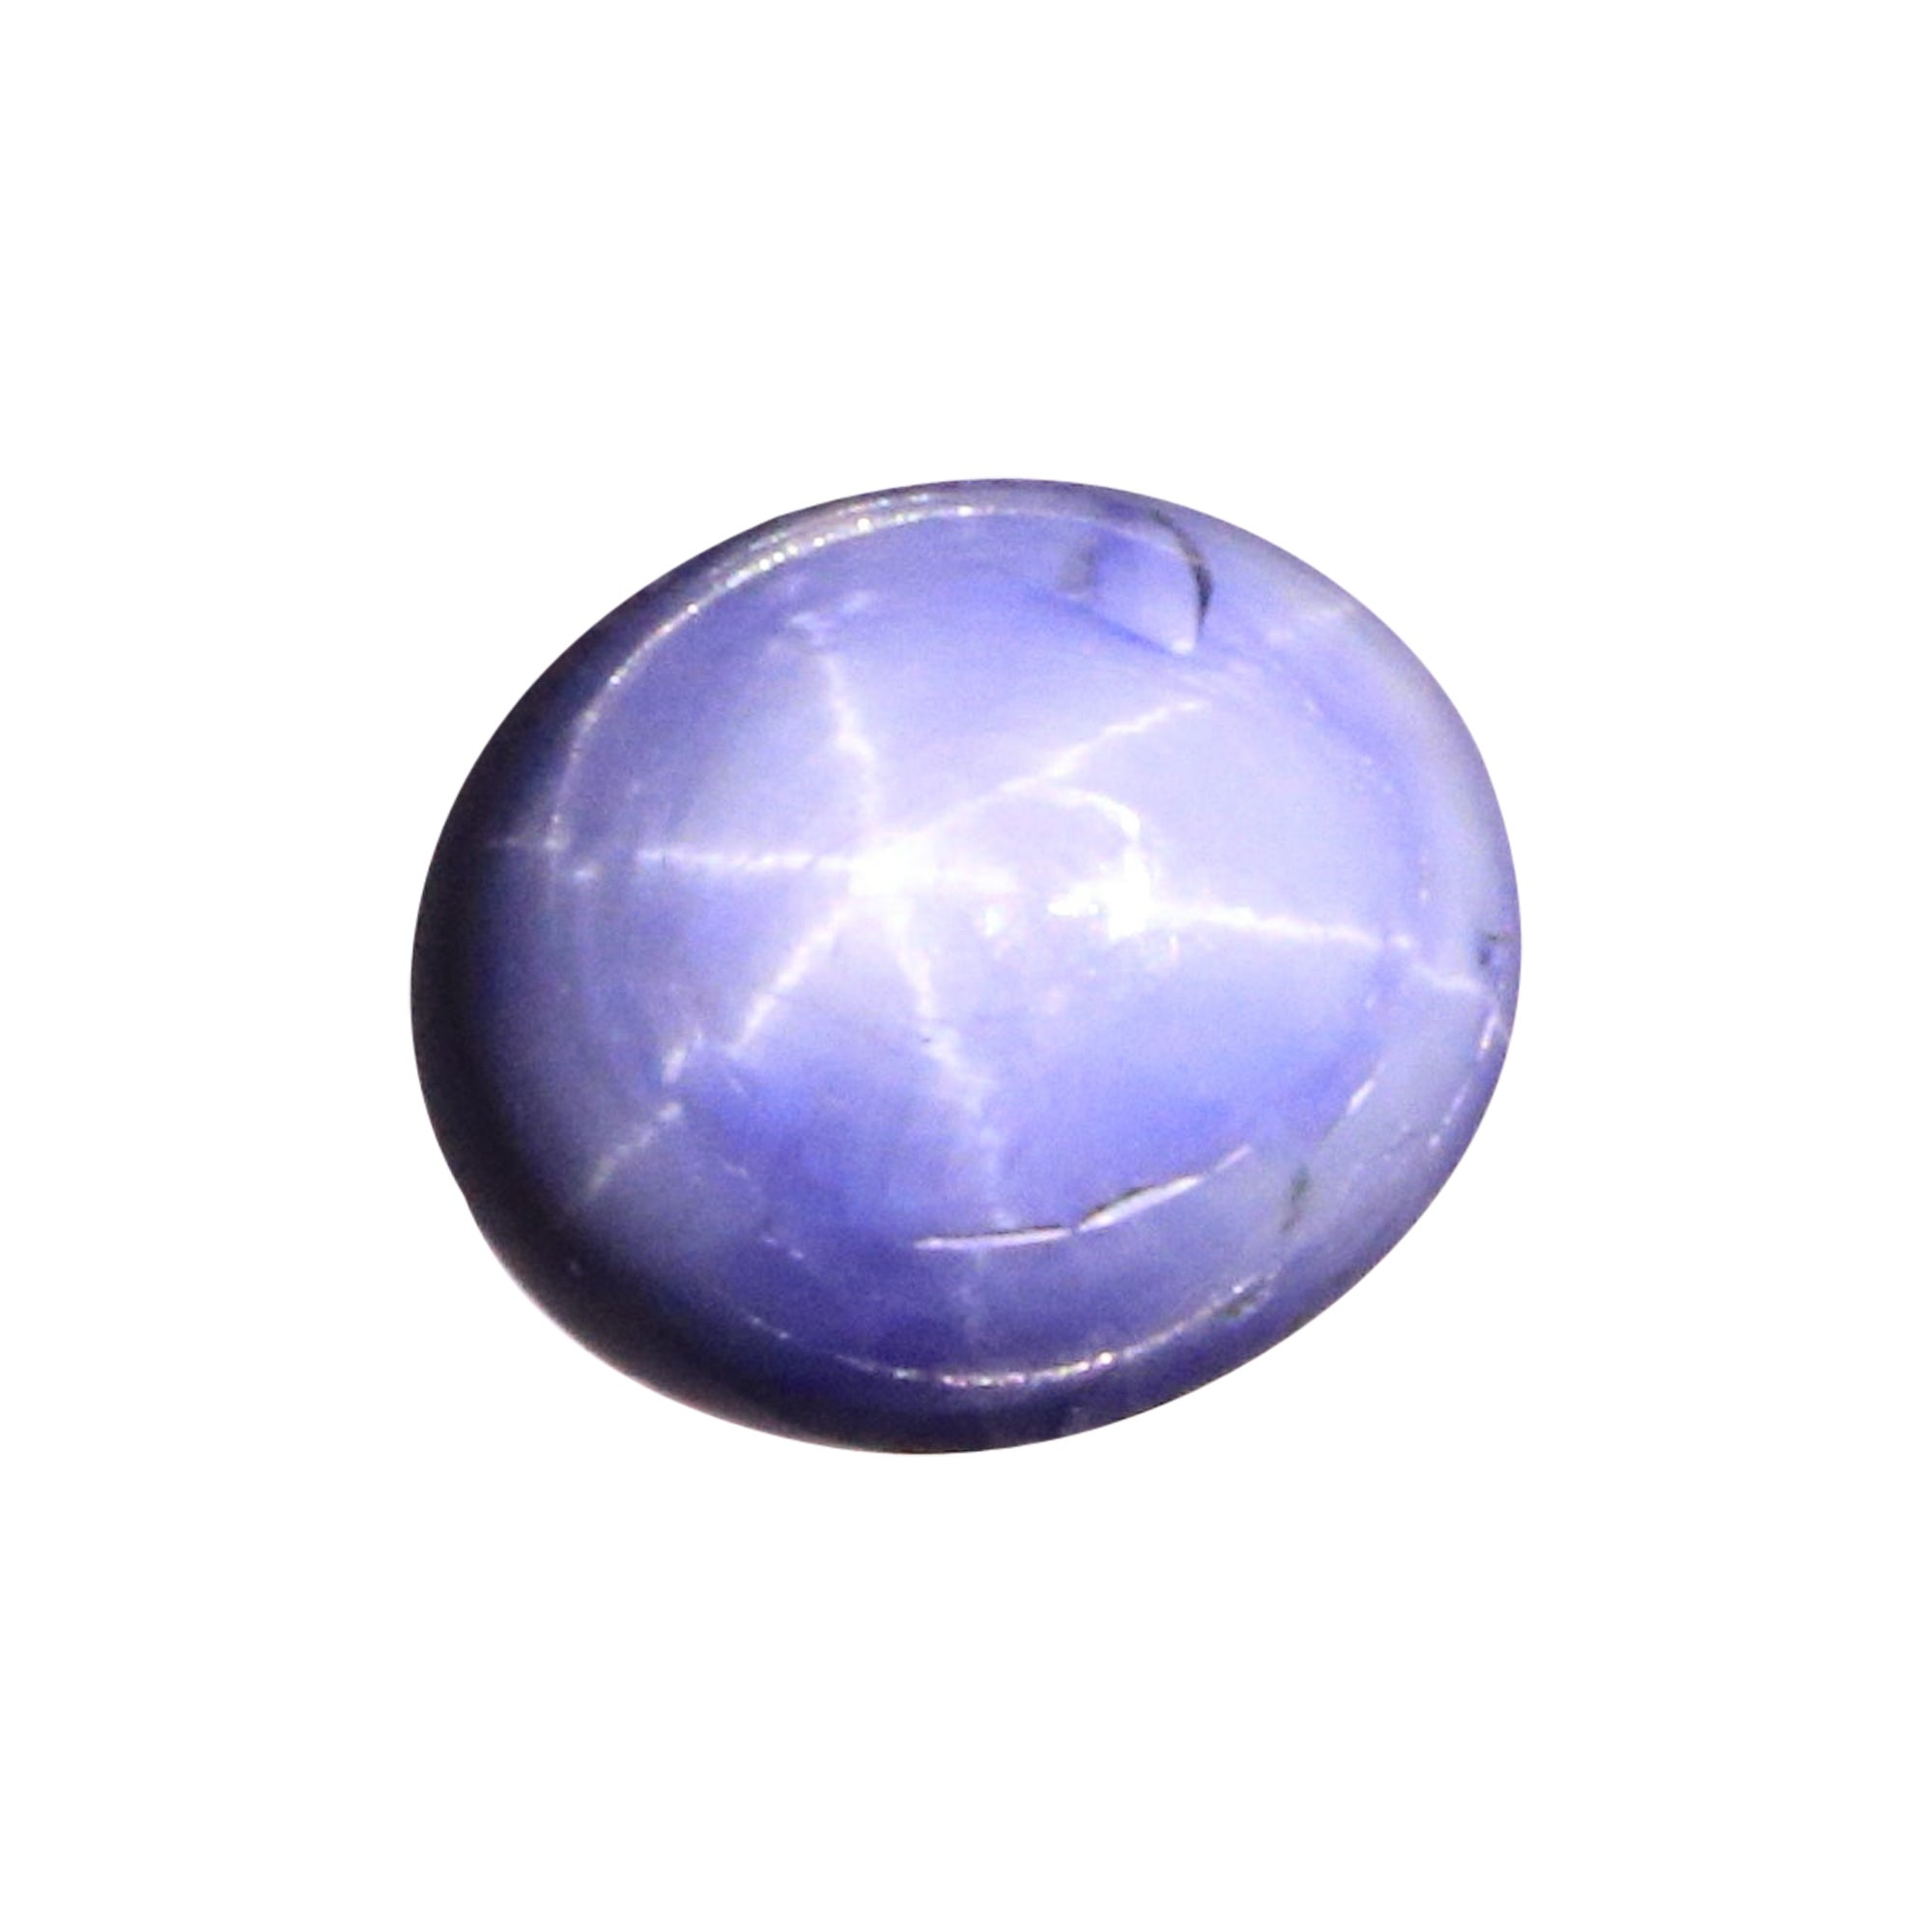 Certified Unheated Star Sapphire - 10.76ct For Sale